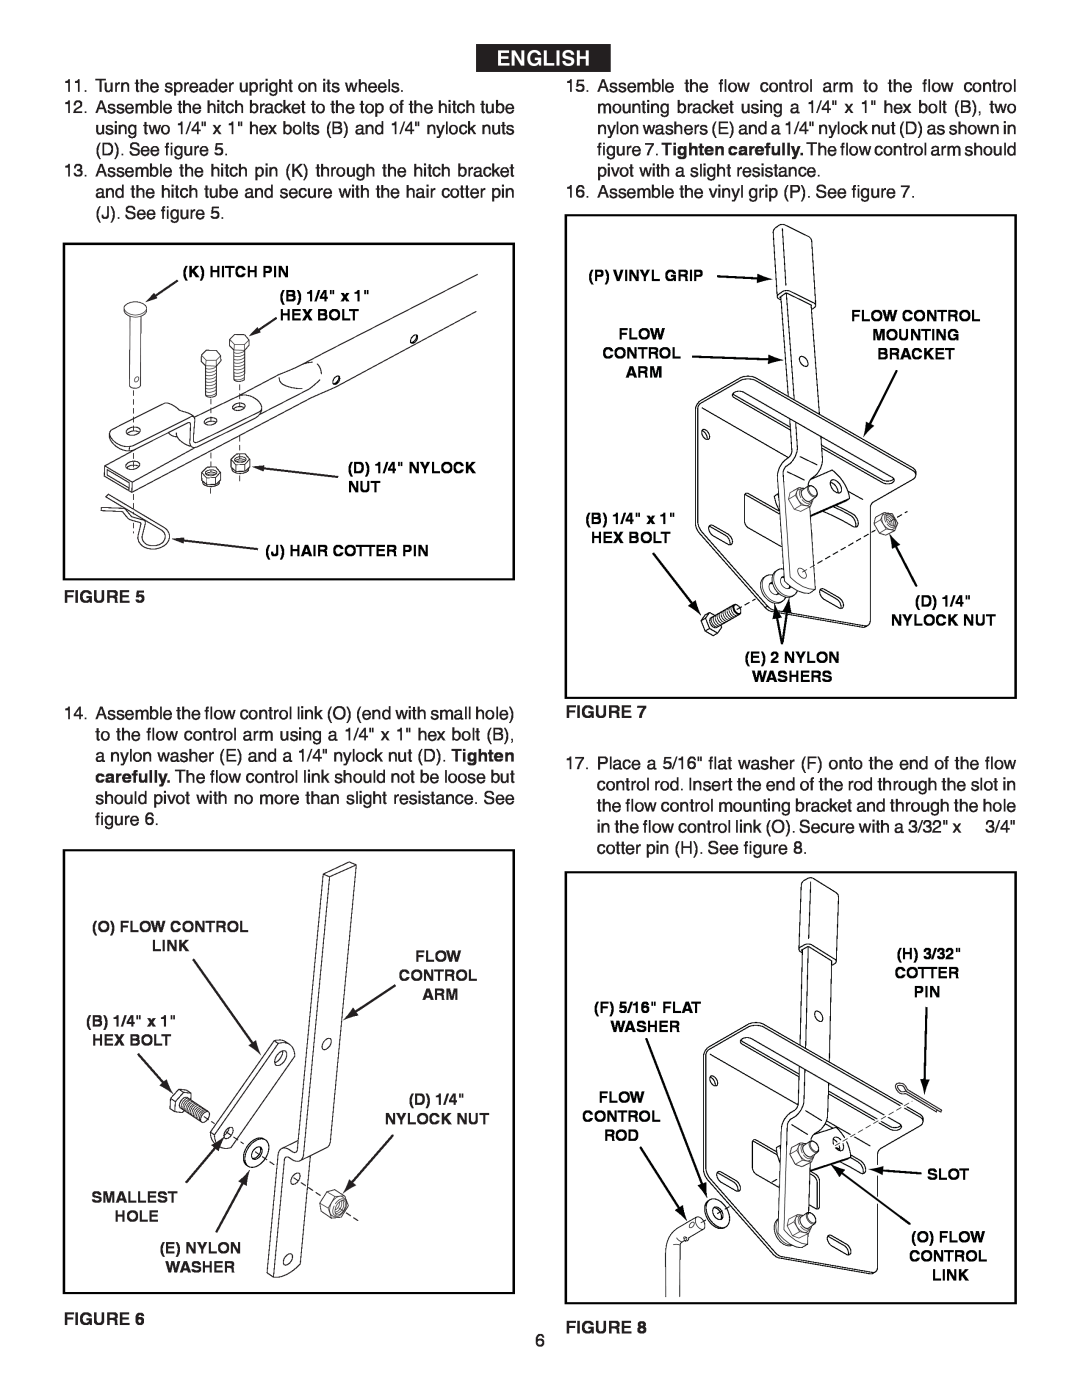 Agri-Fab 45-02114 owner manual English, Turn the spreader upright on its wheels 